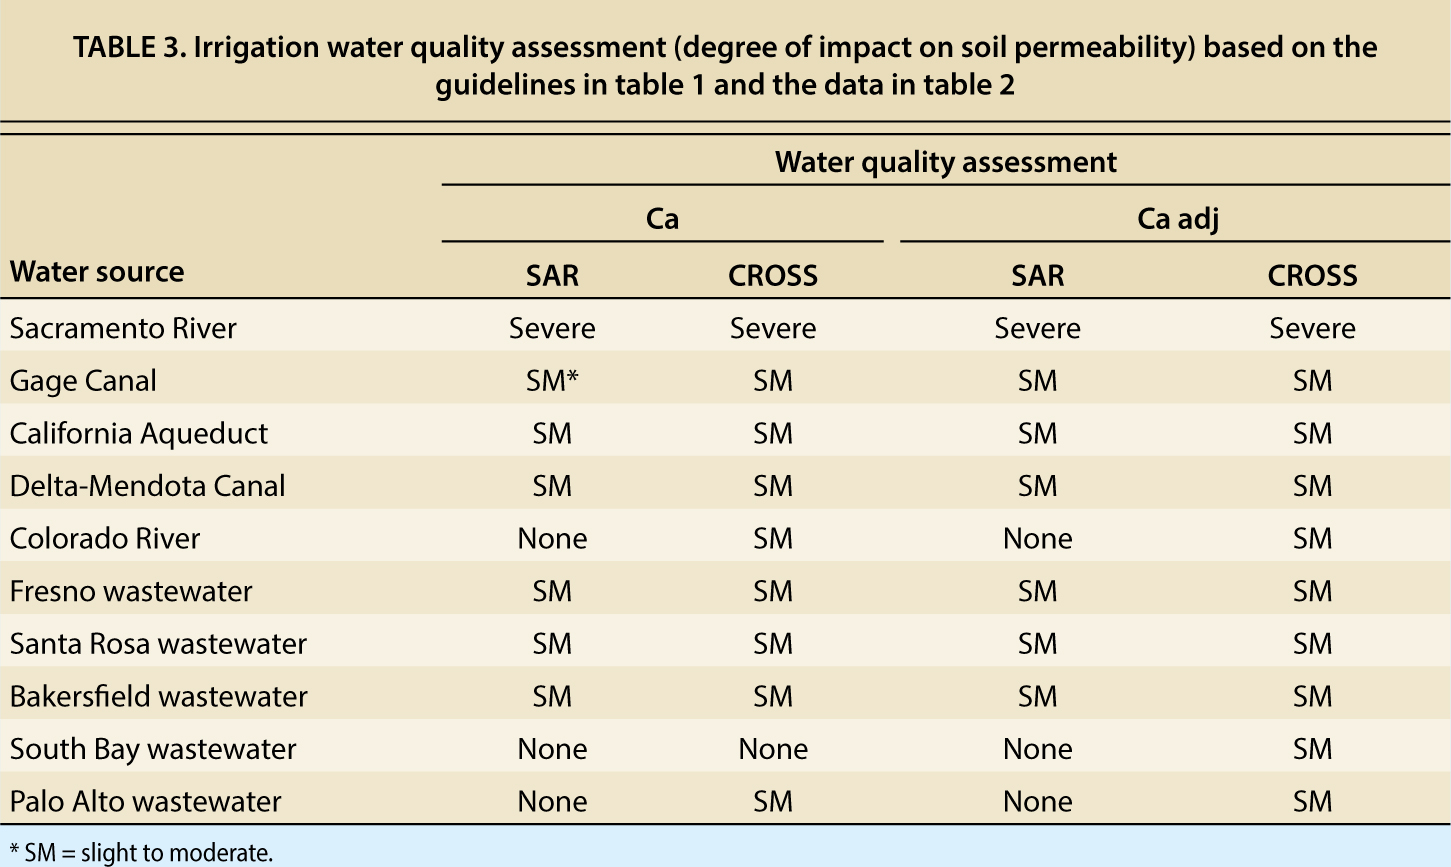 Irrigation water quality assessment (degree of impact on soil permeability) based on the guidelines in table 1 and the data in table 2